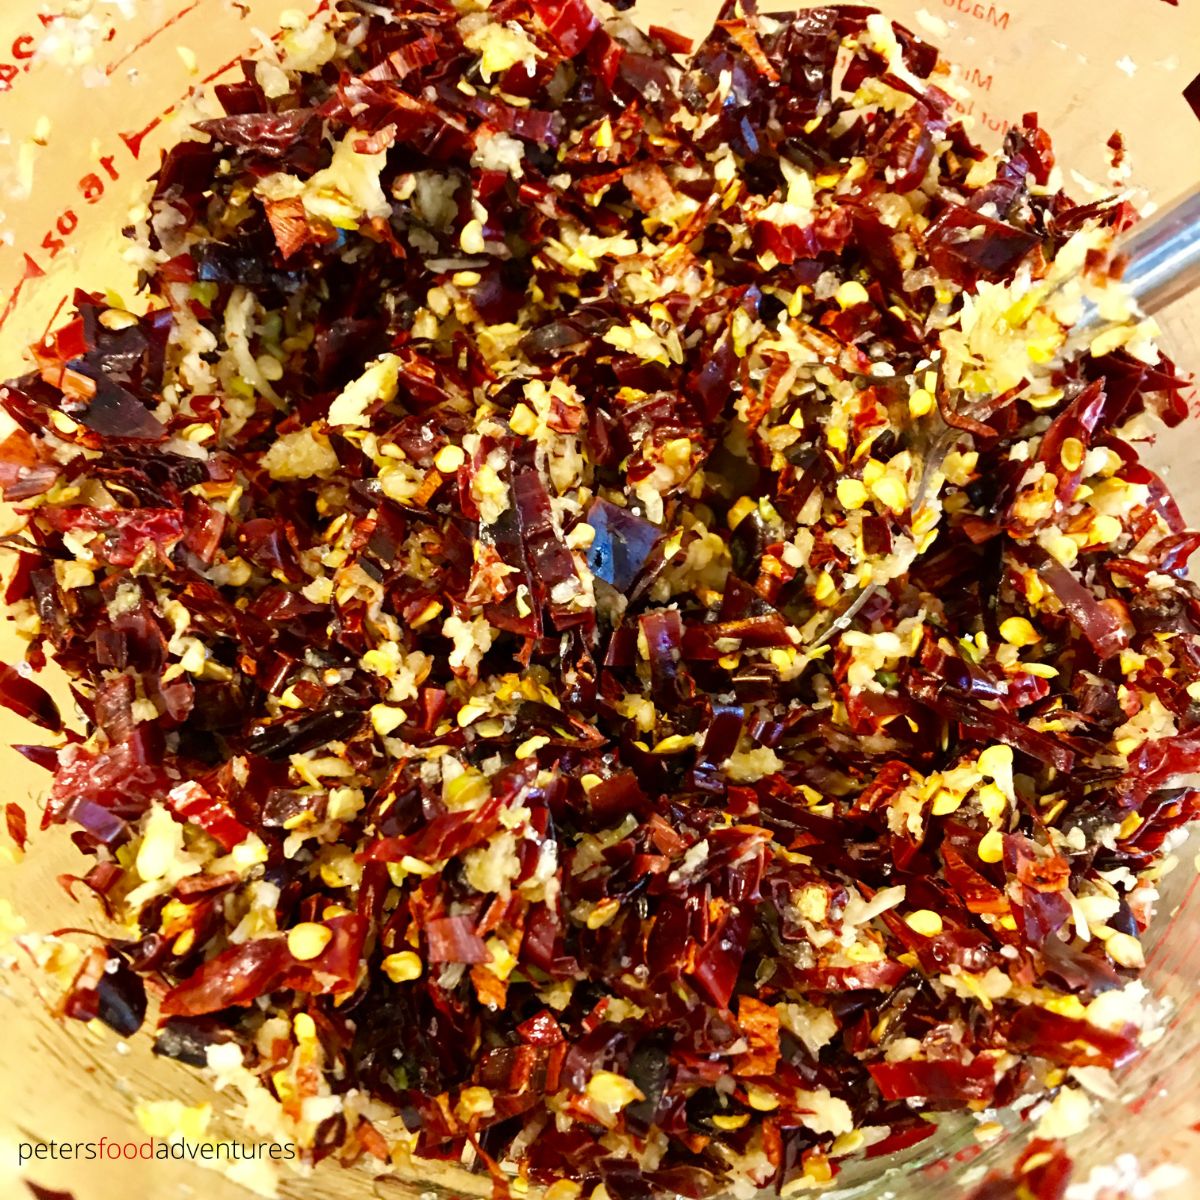 chopped dried chili peppers